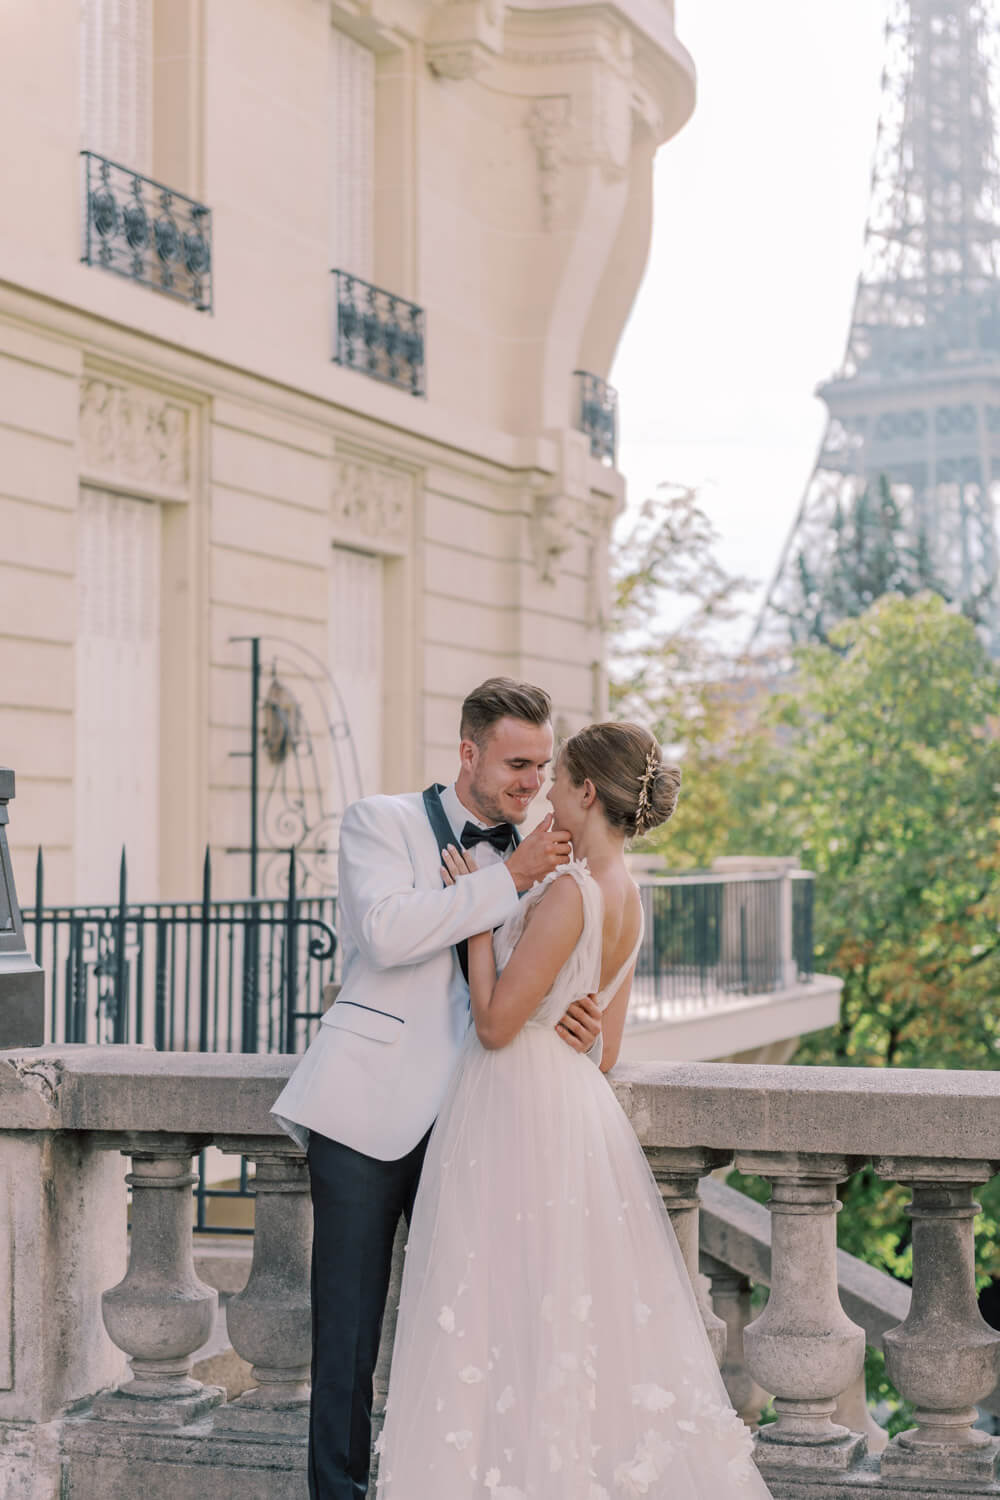 The work of an English speaking wedding photographer in France